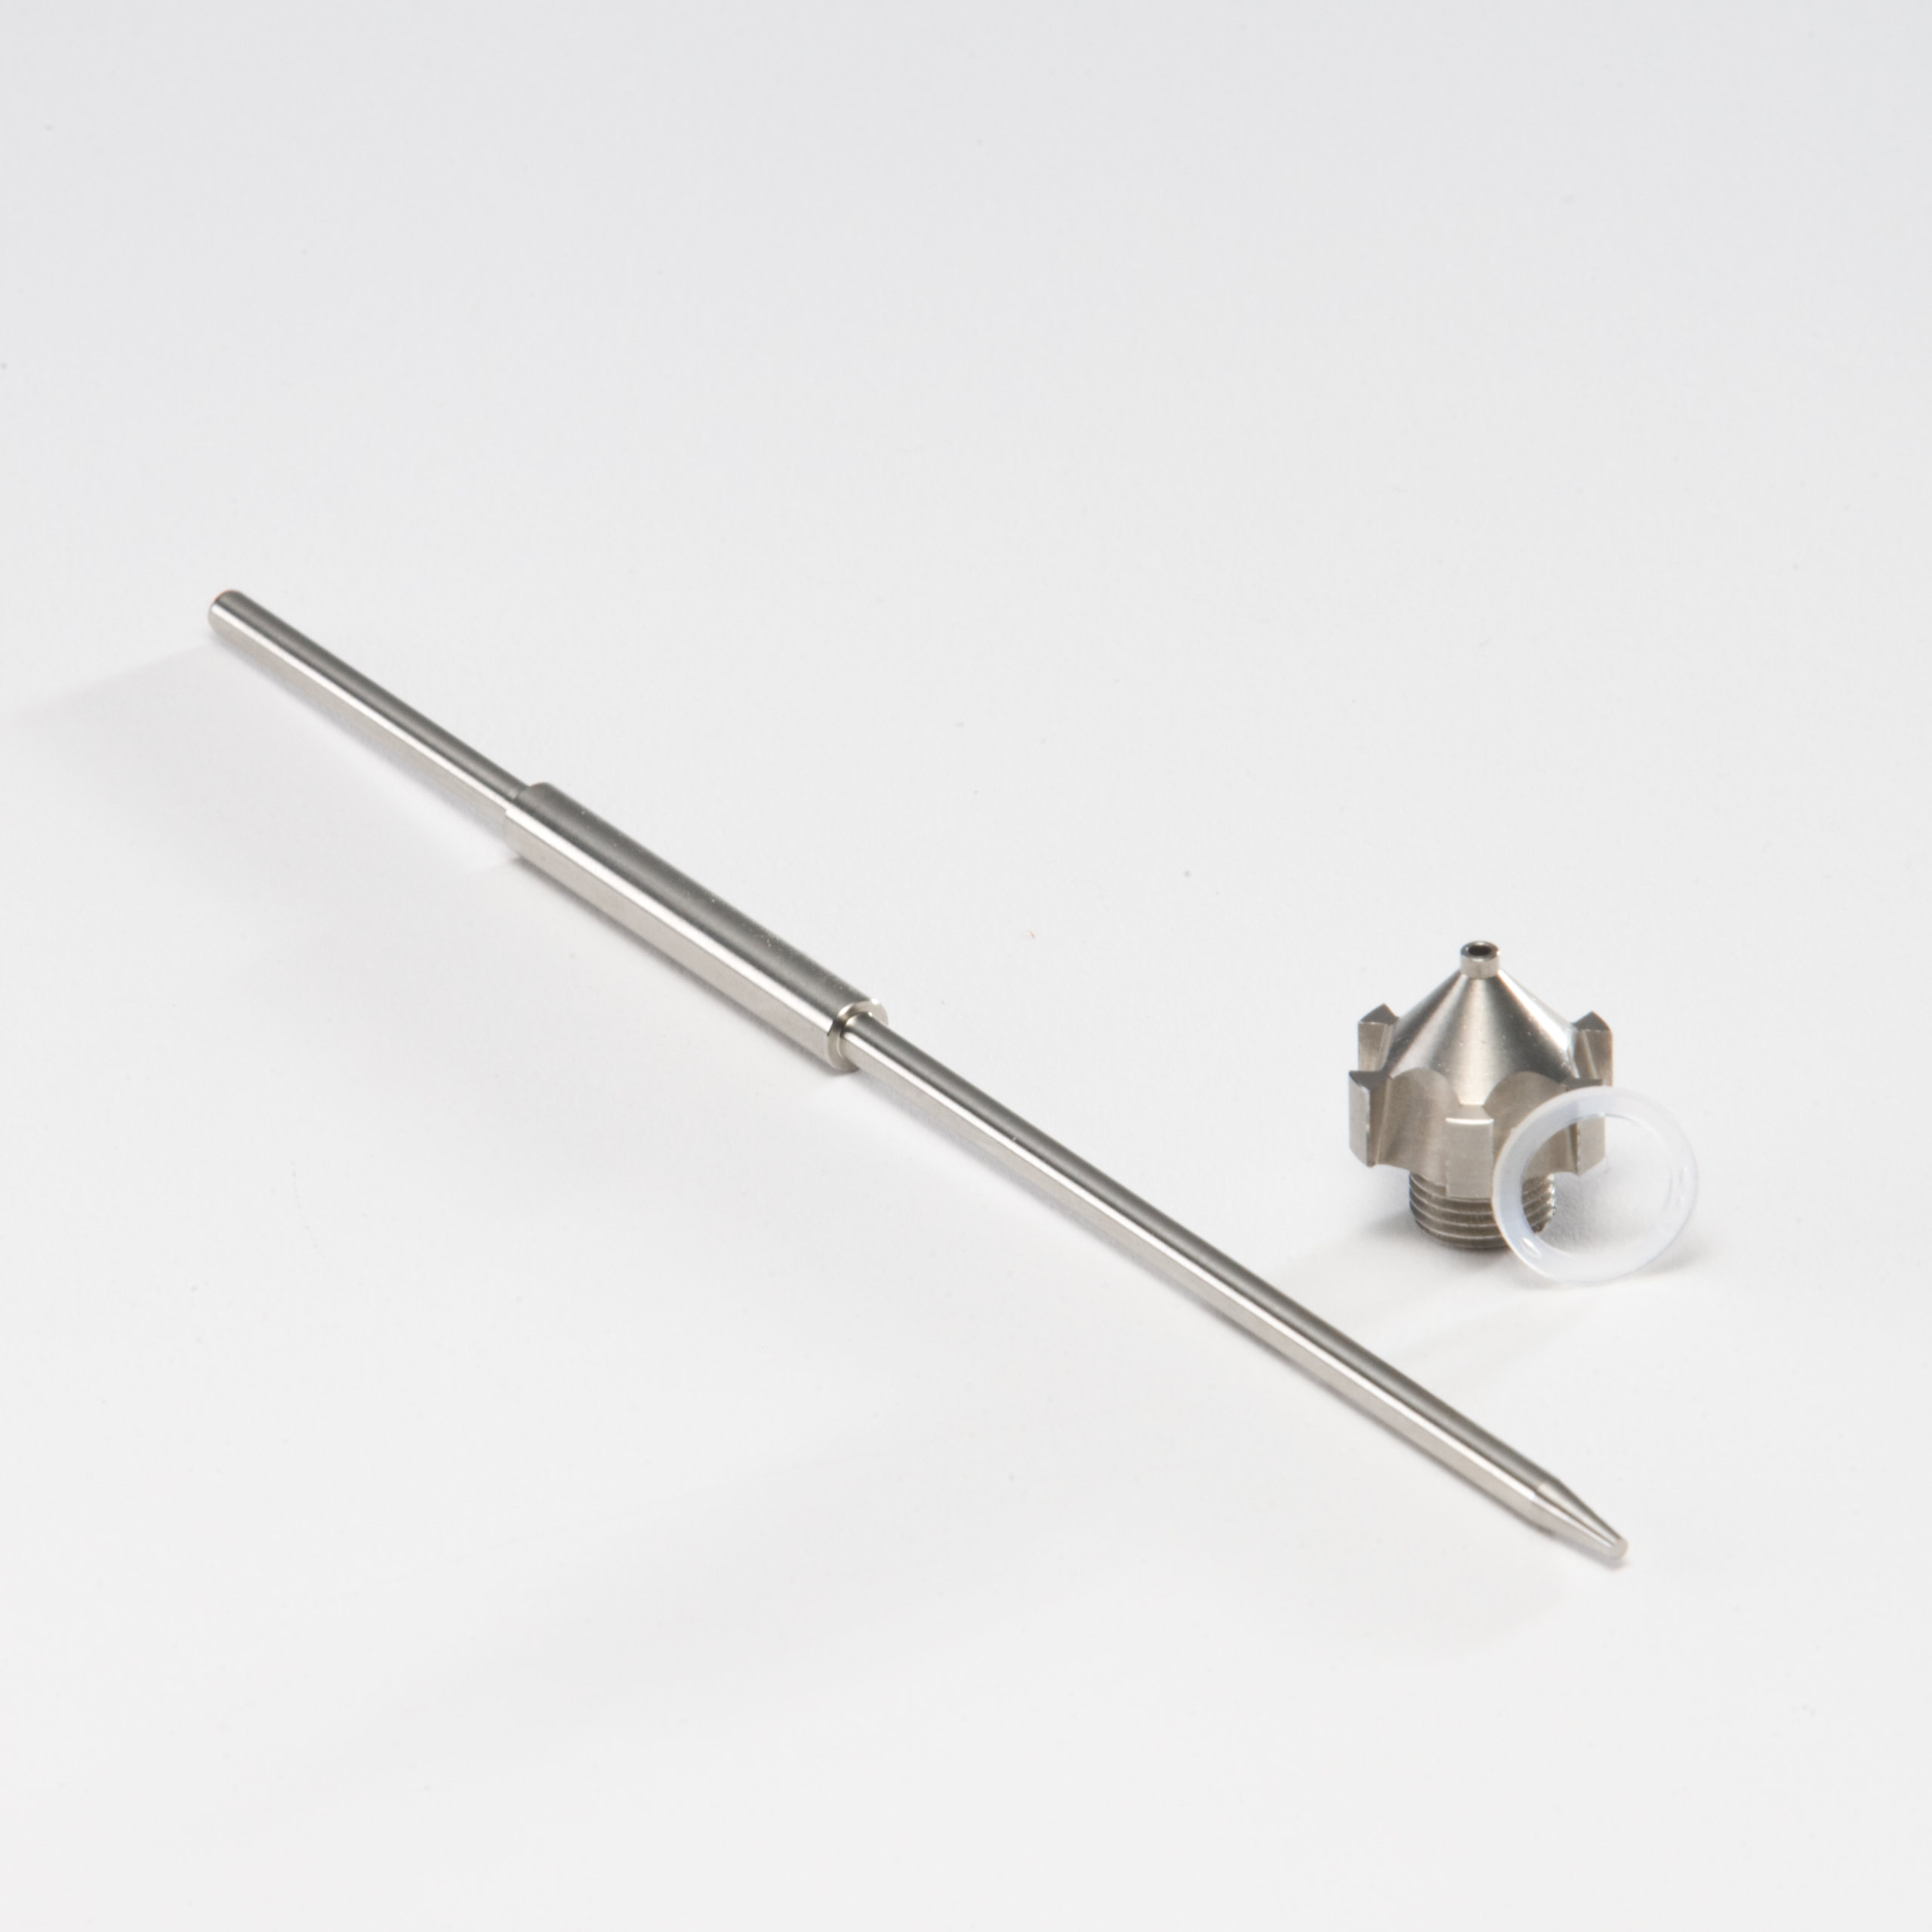 2.0mm Stainless Steel Needle and Tip